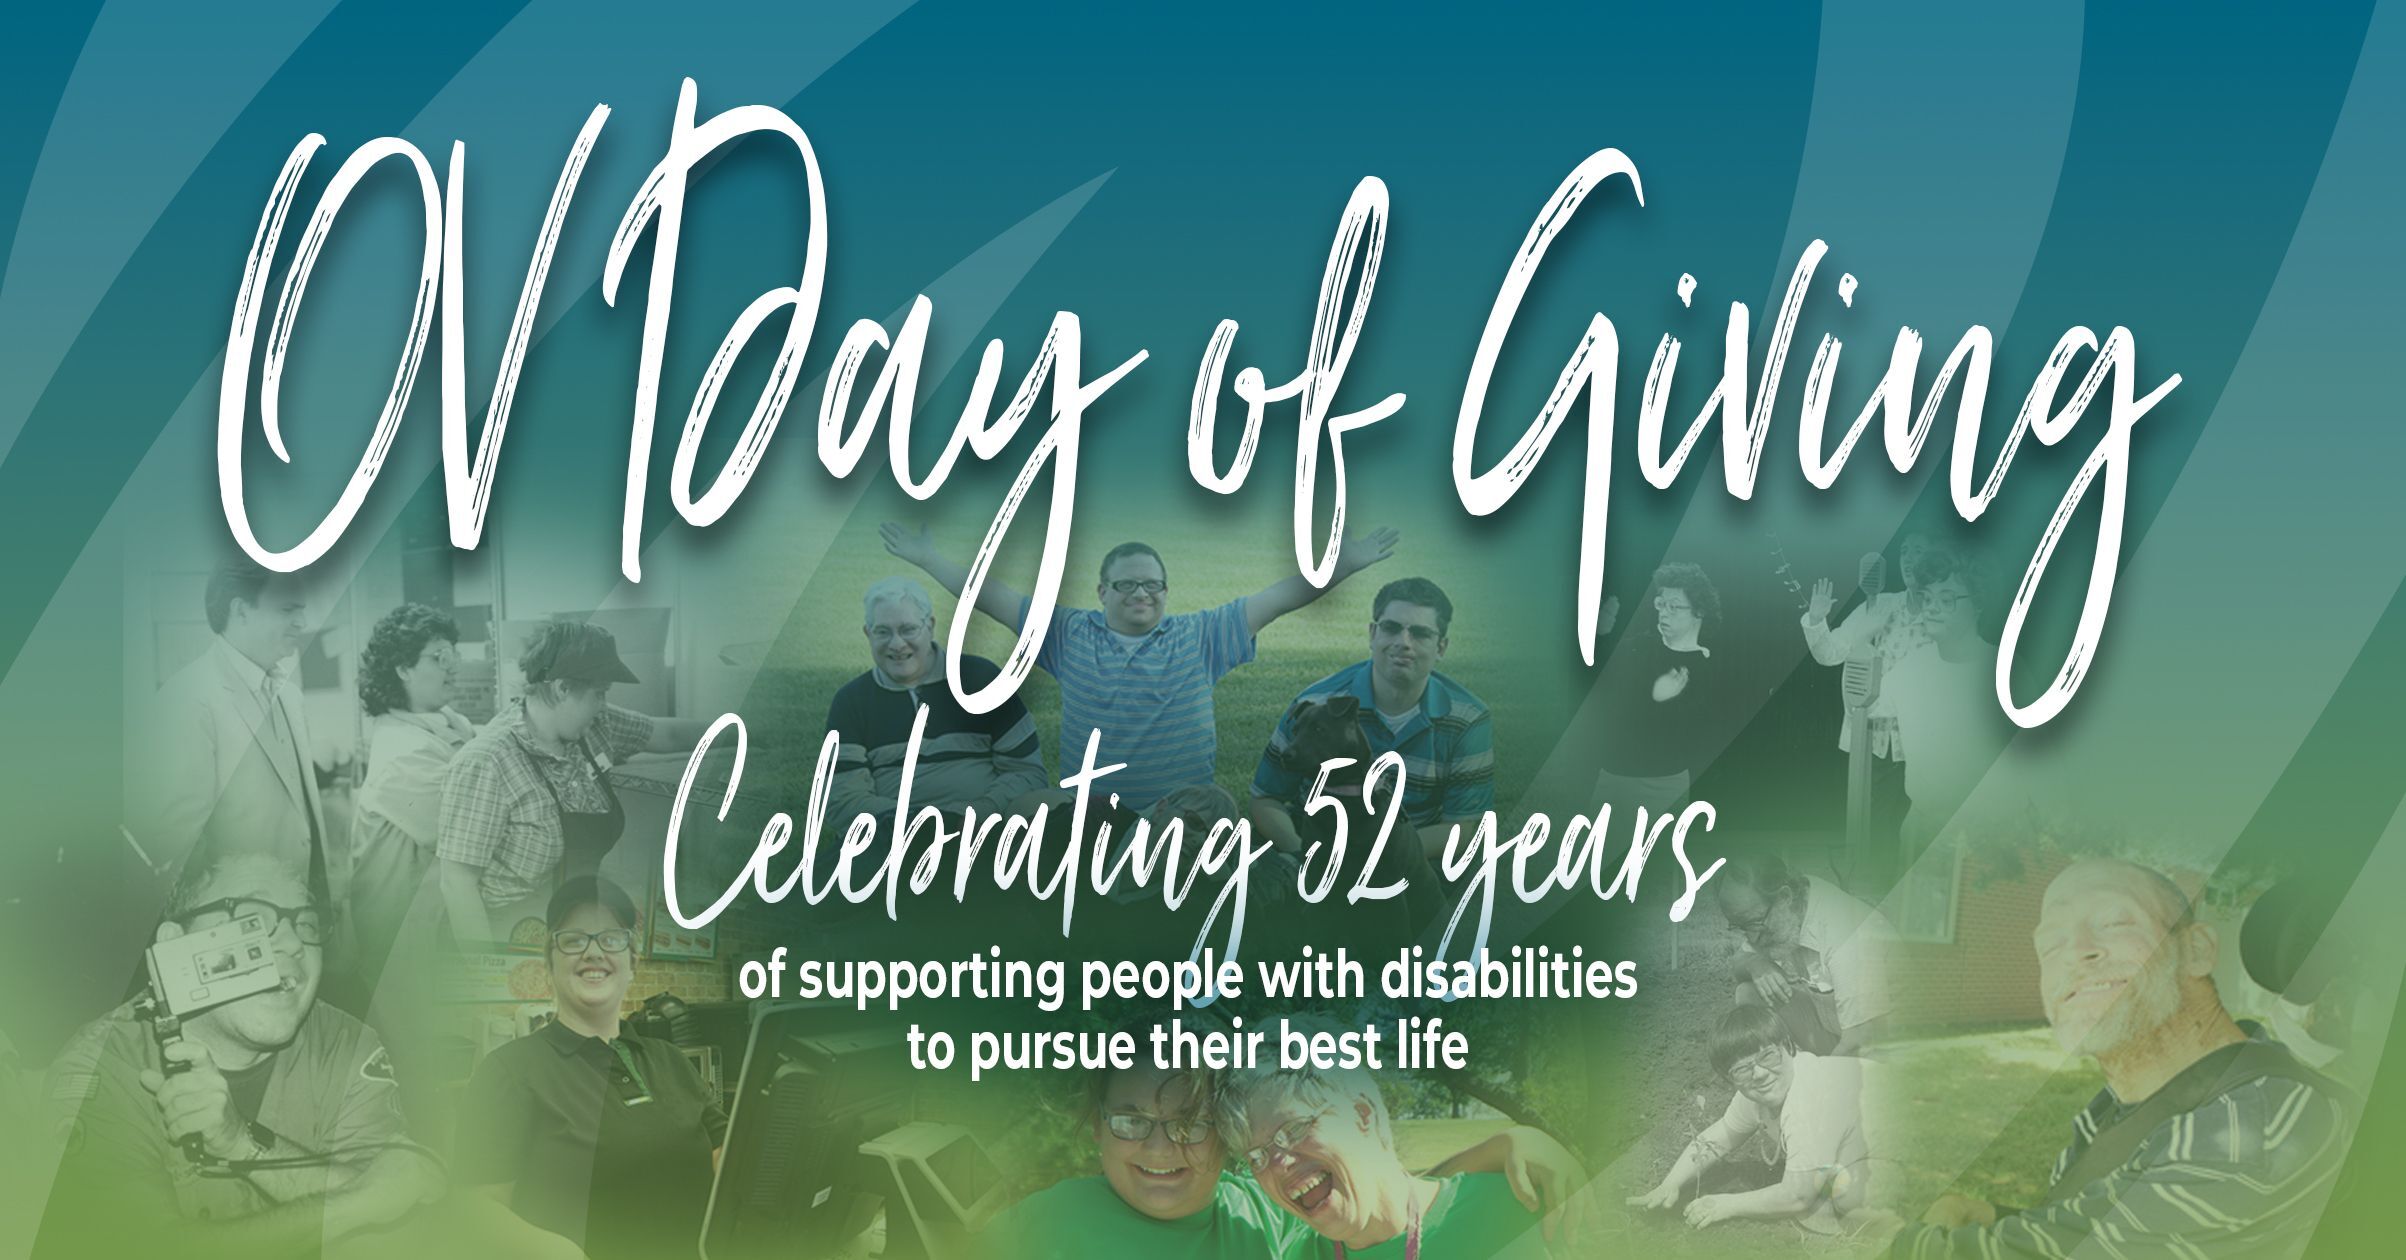 OV Day of Giving is Coming Up!